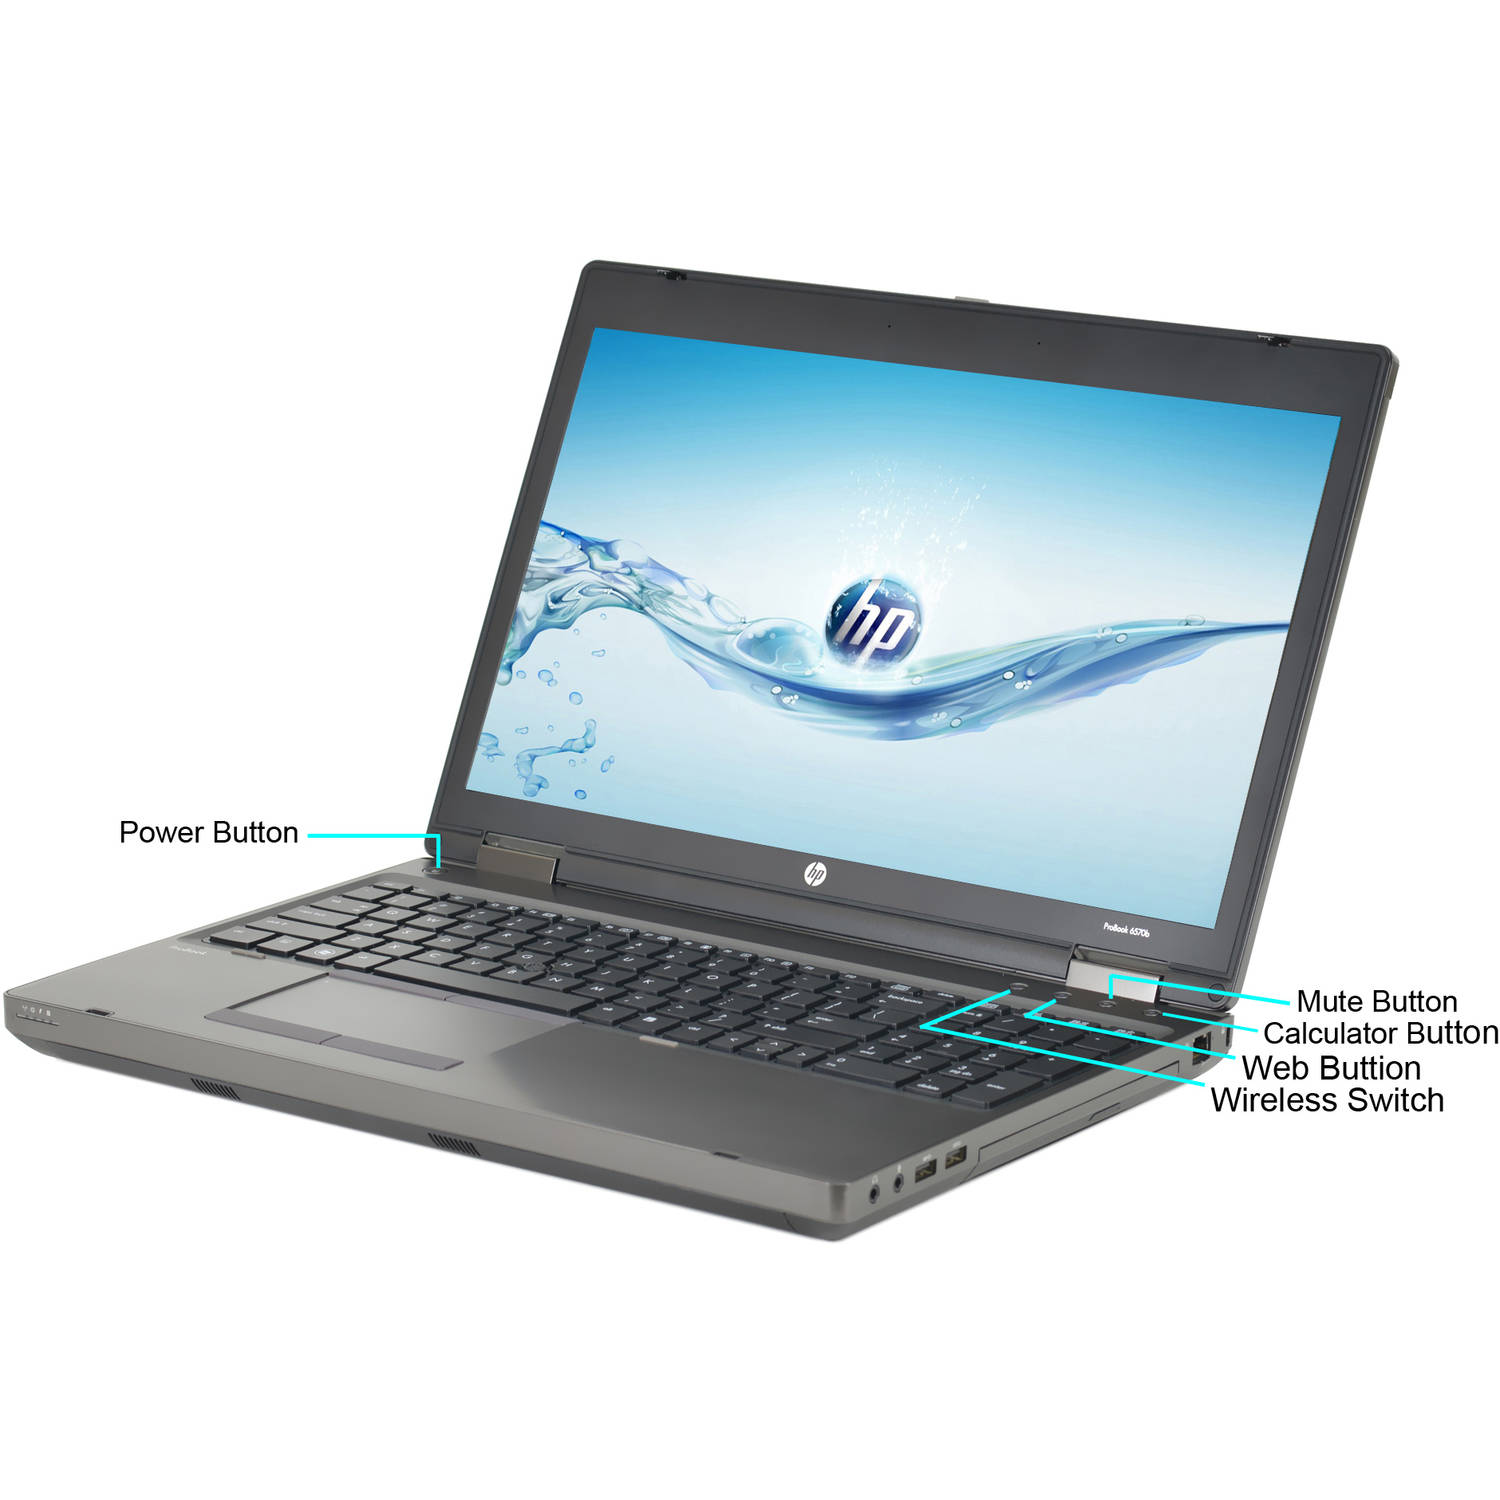 Restored HP 15.6" ProBook 6570B WA5-0877 Laptop PC with Intel Core i5-3320M Processor, 8GB Memory, 128GB Solid State Drive and Windows 10 Pro (Refurbished) - image 2 of 4